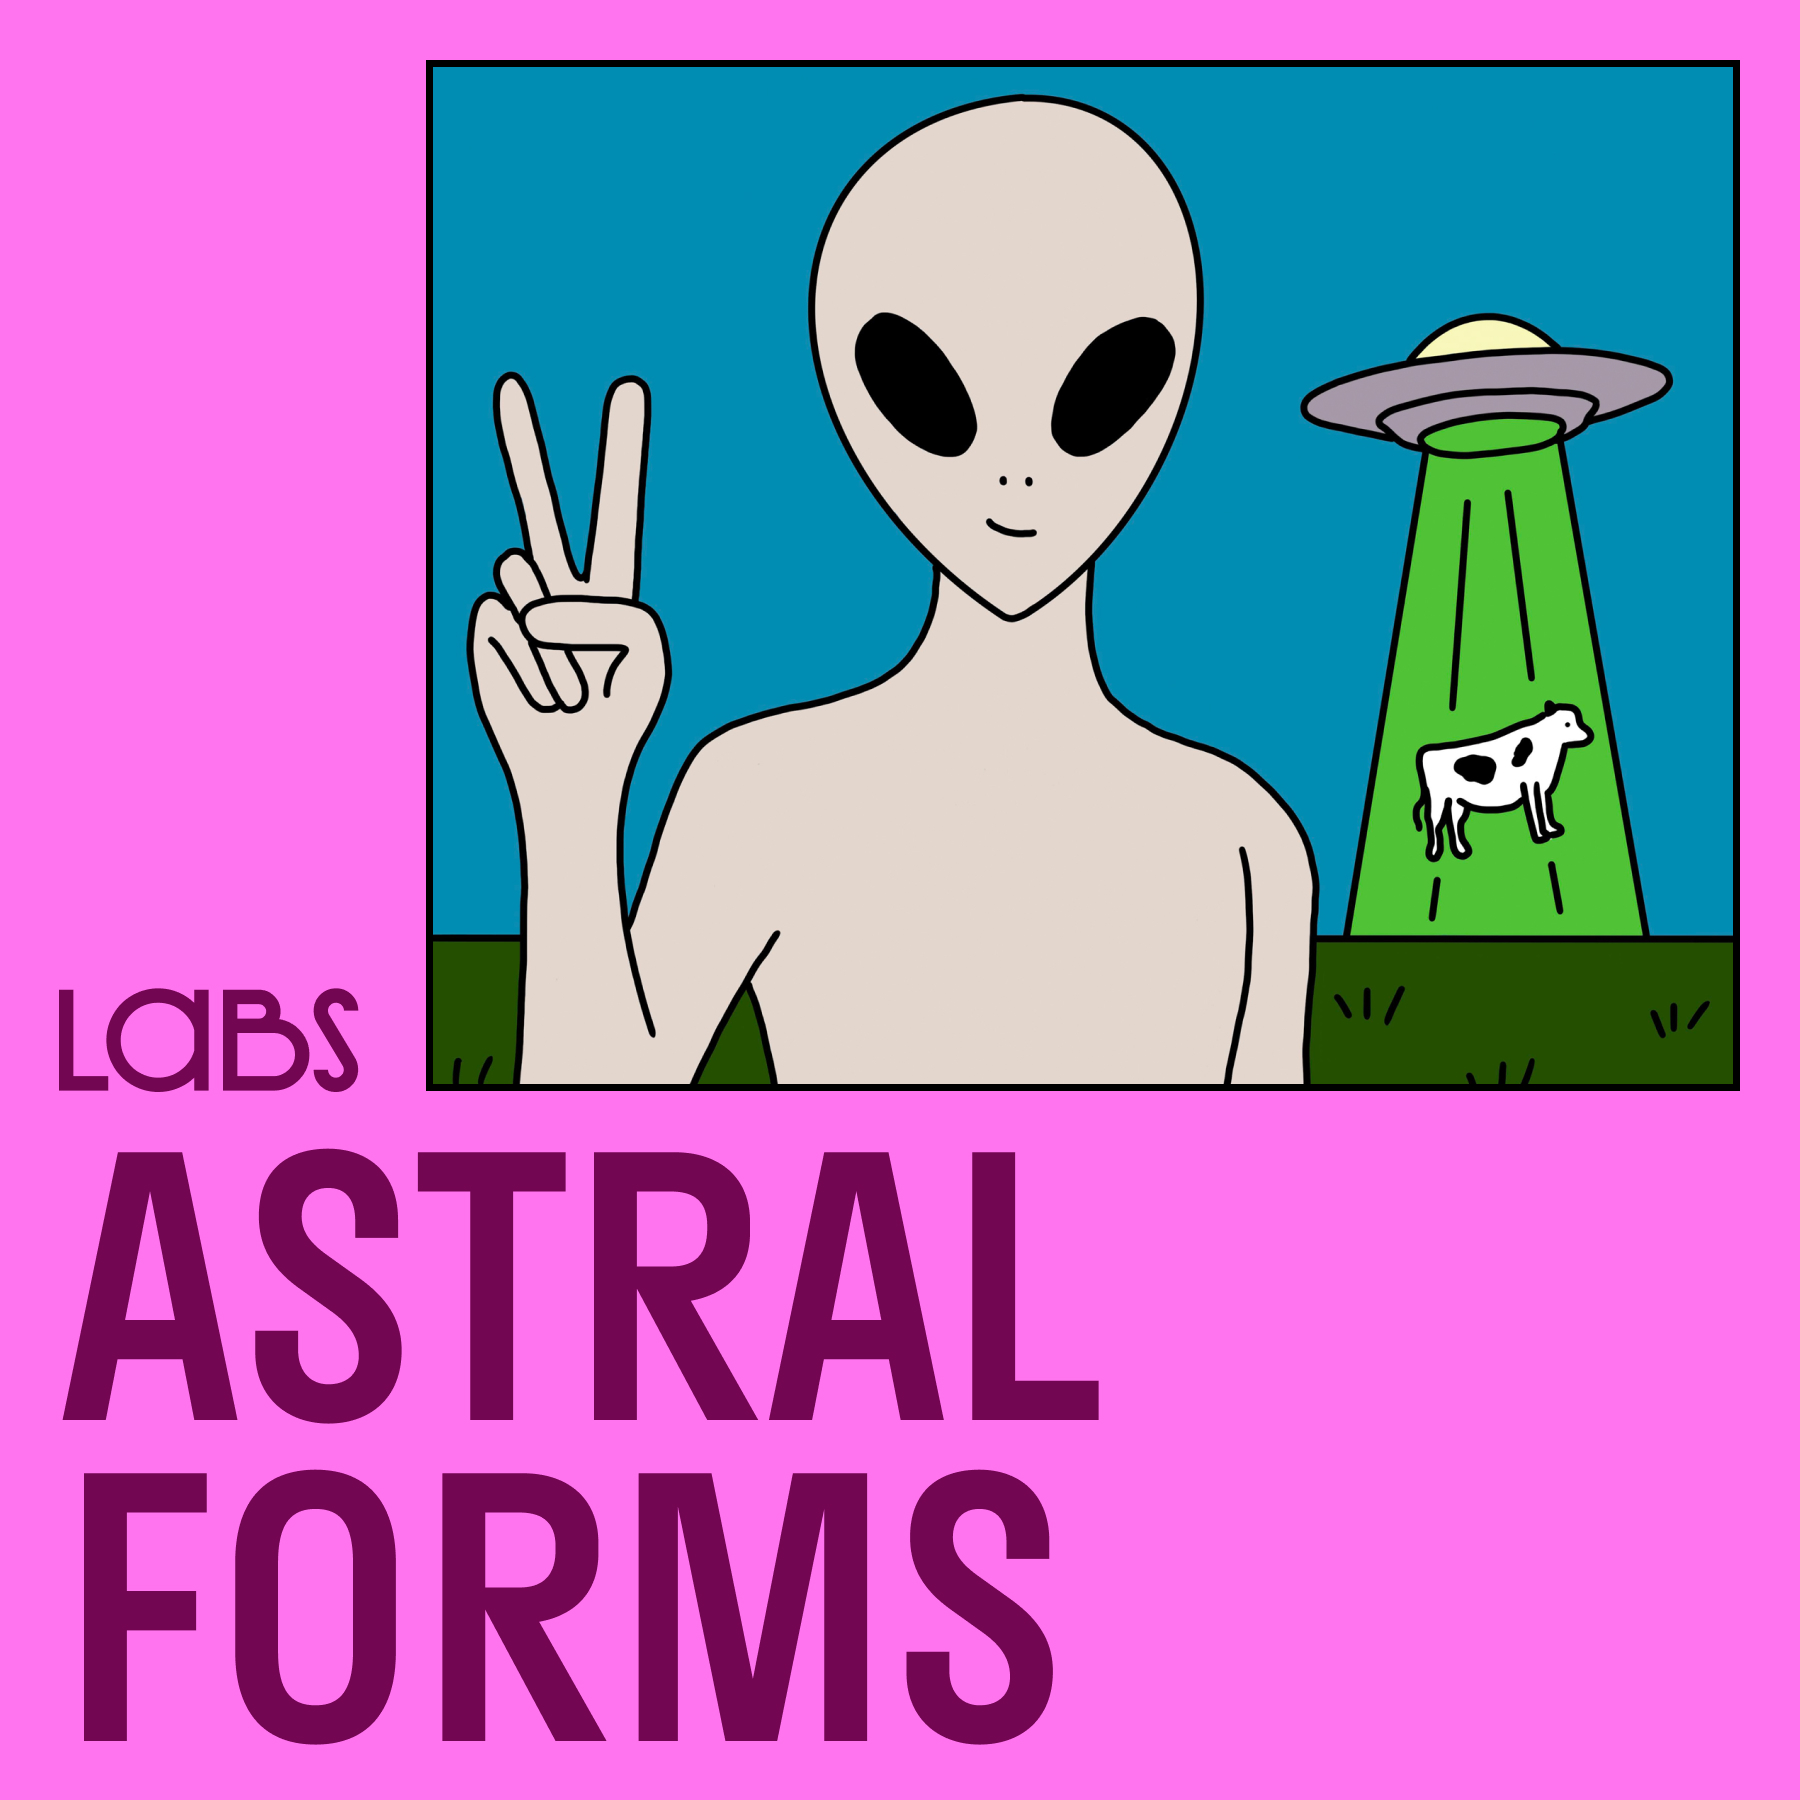 LABS Astral Forms